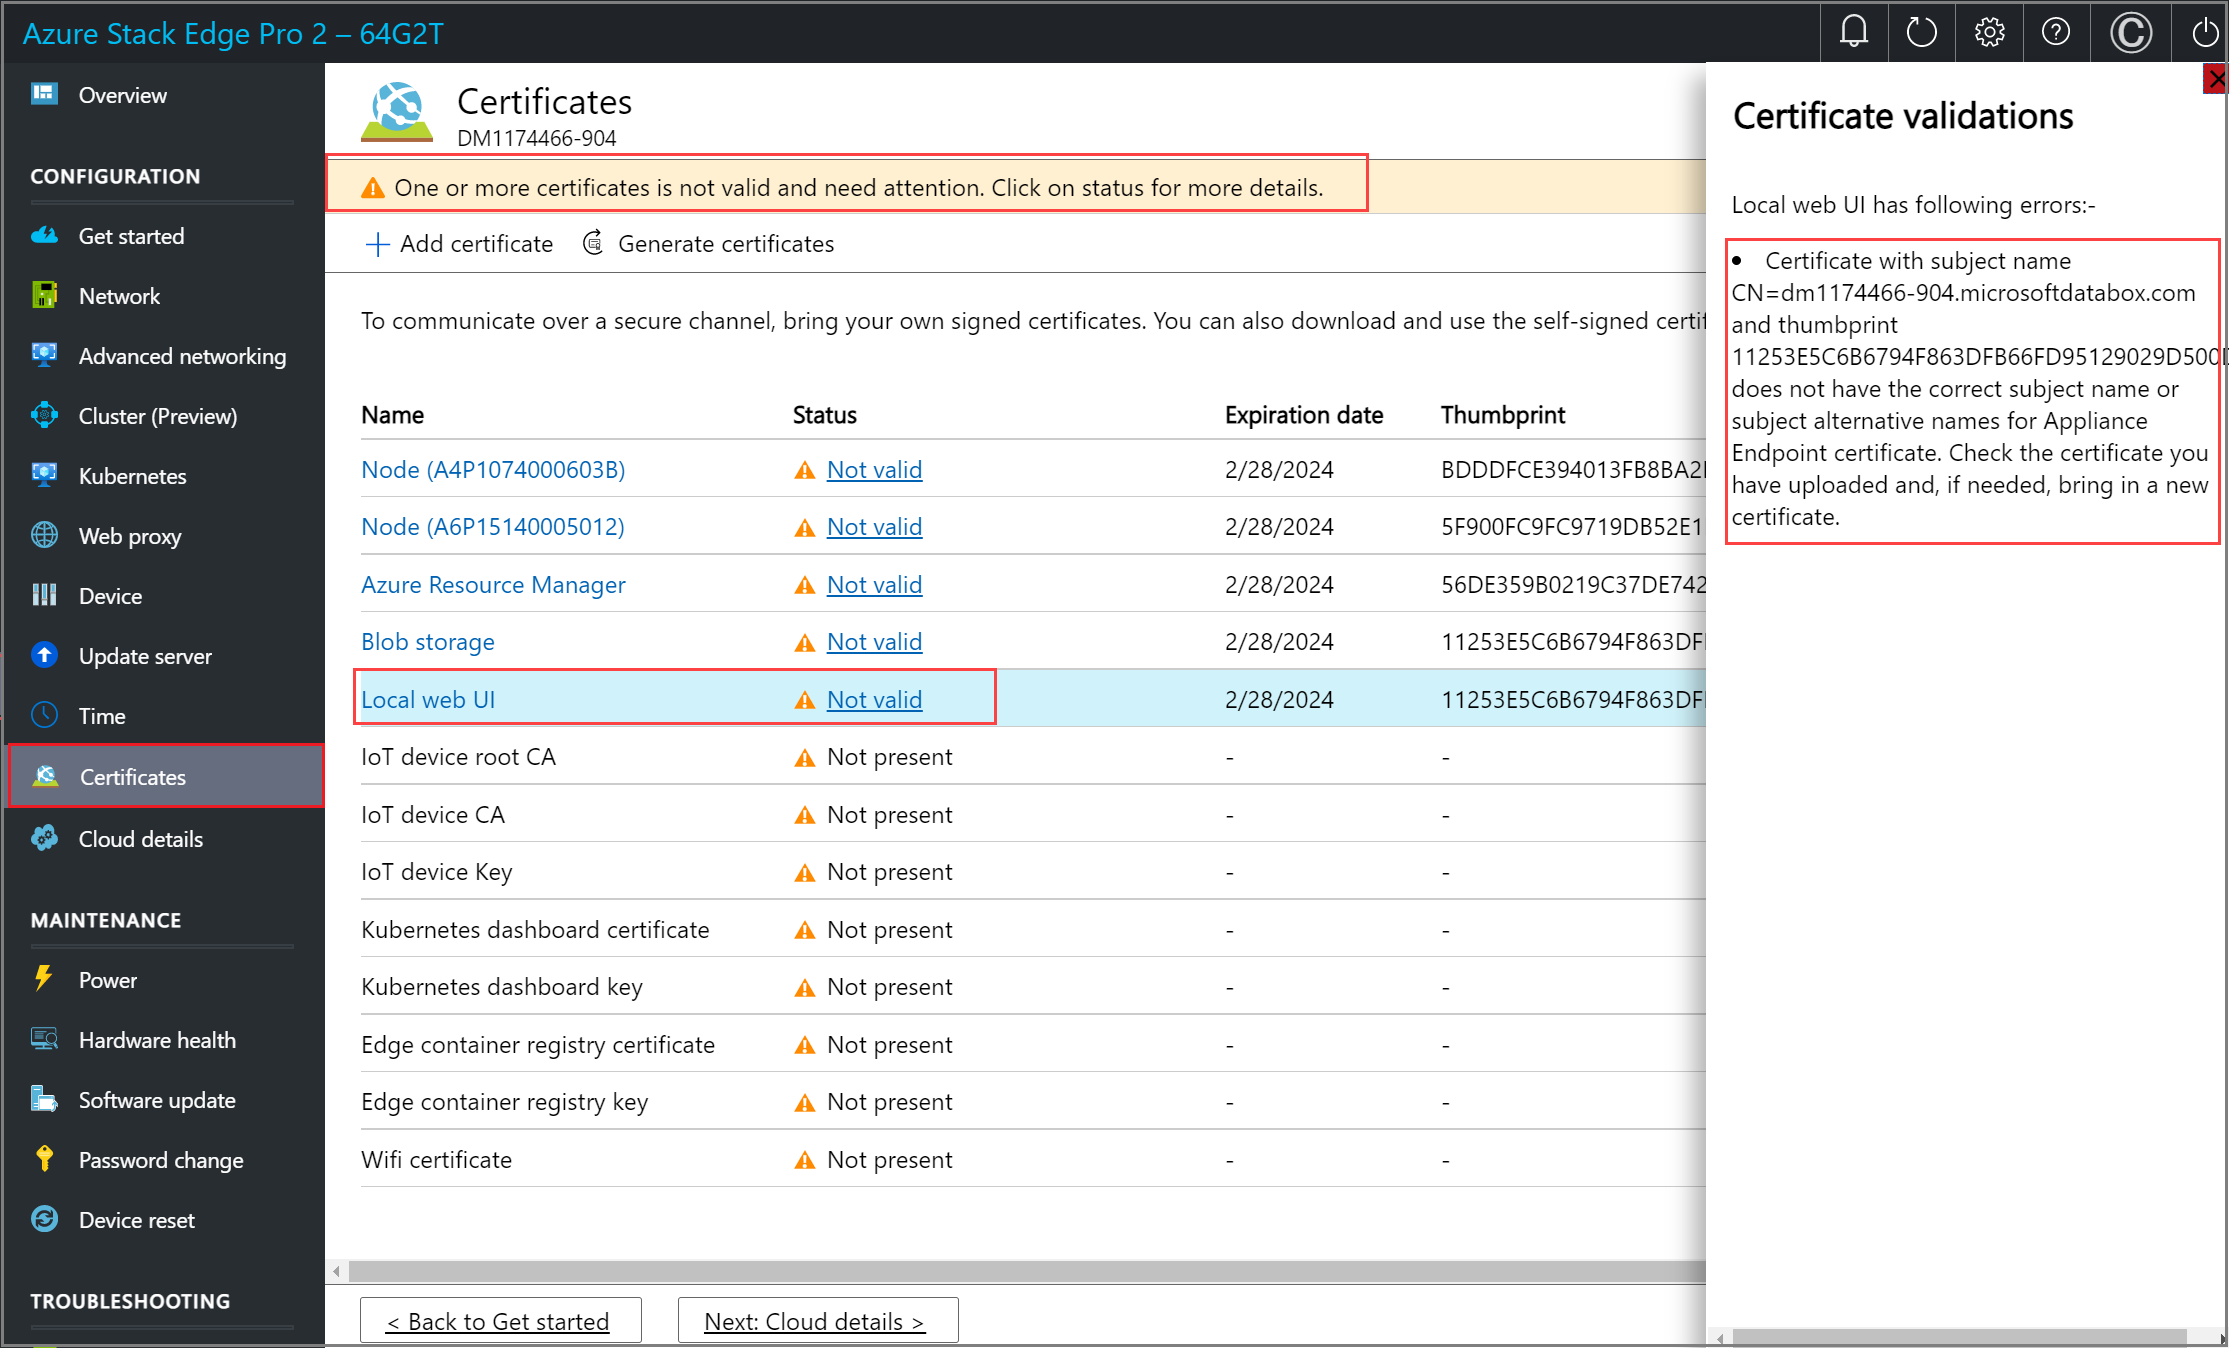 Screenshot of Certificate Details for a certificate on the Certificates page in the local web UI of an Azure Stack Edge device. The selected certificate and certificate details are highlighted.